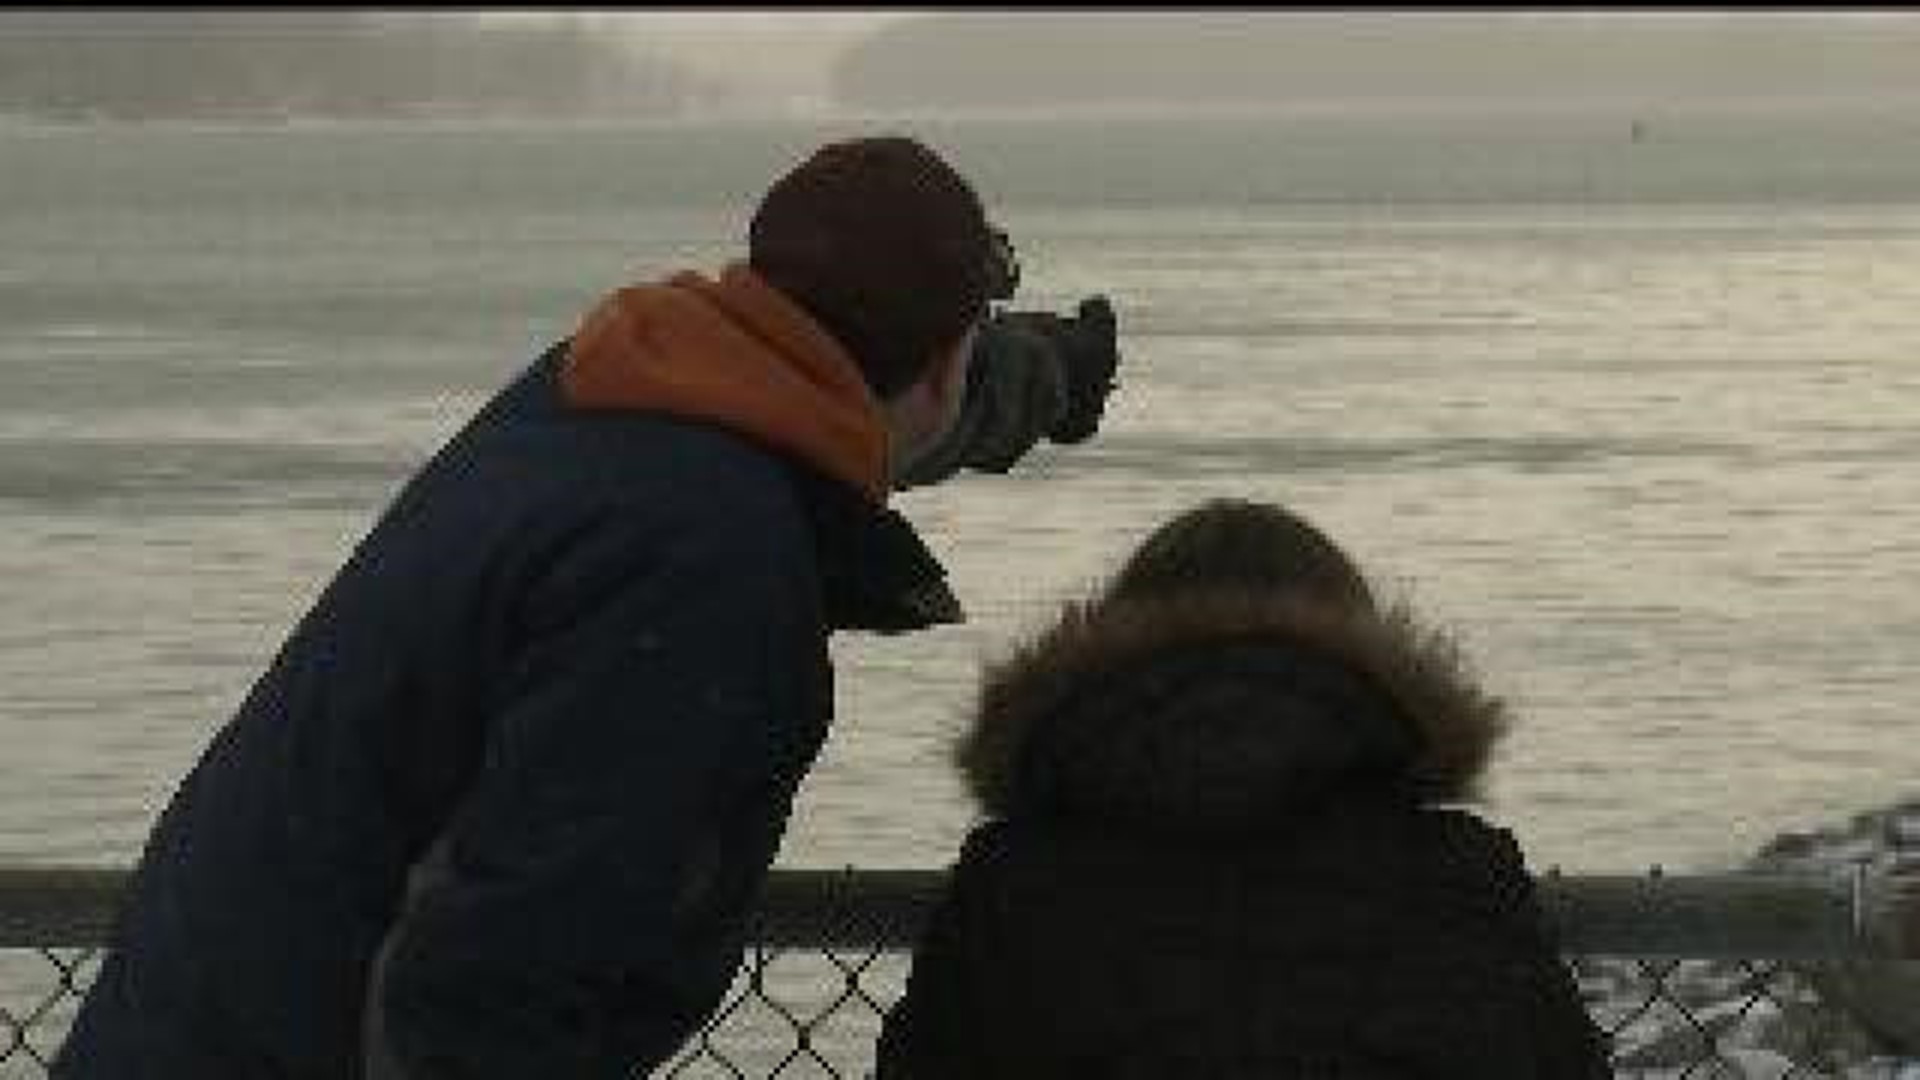 Eagles and photographers flocking to the Mississippi